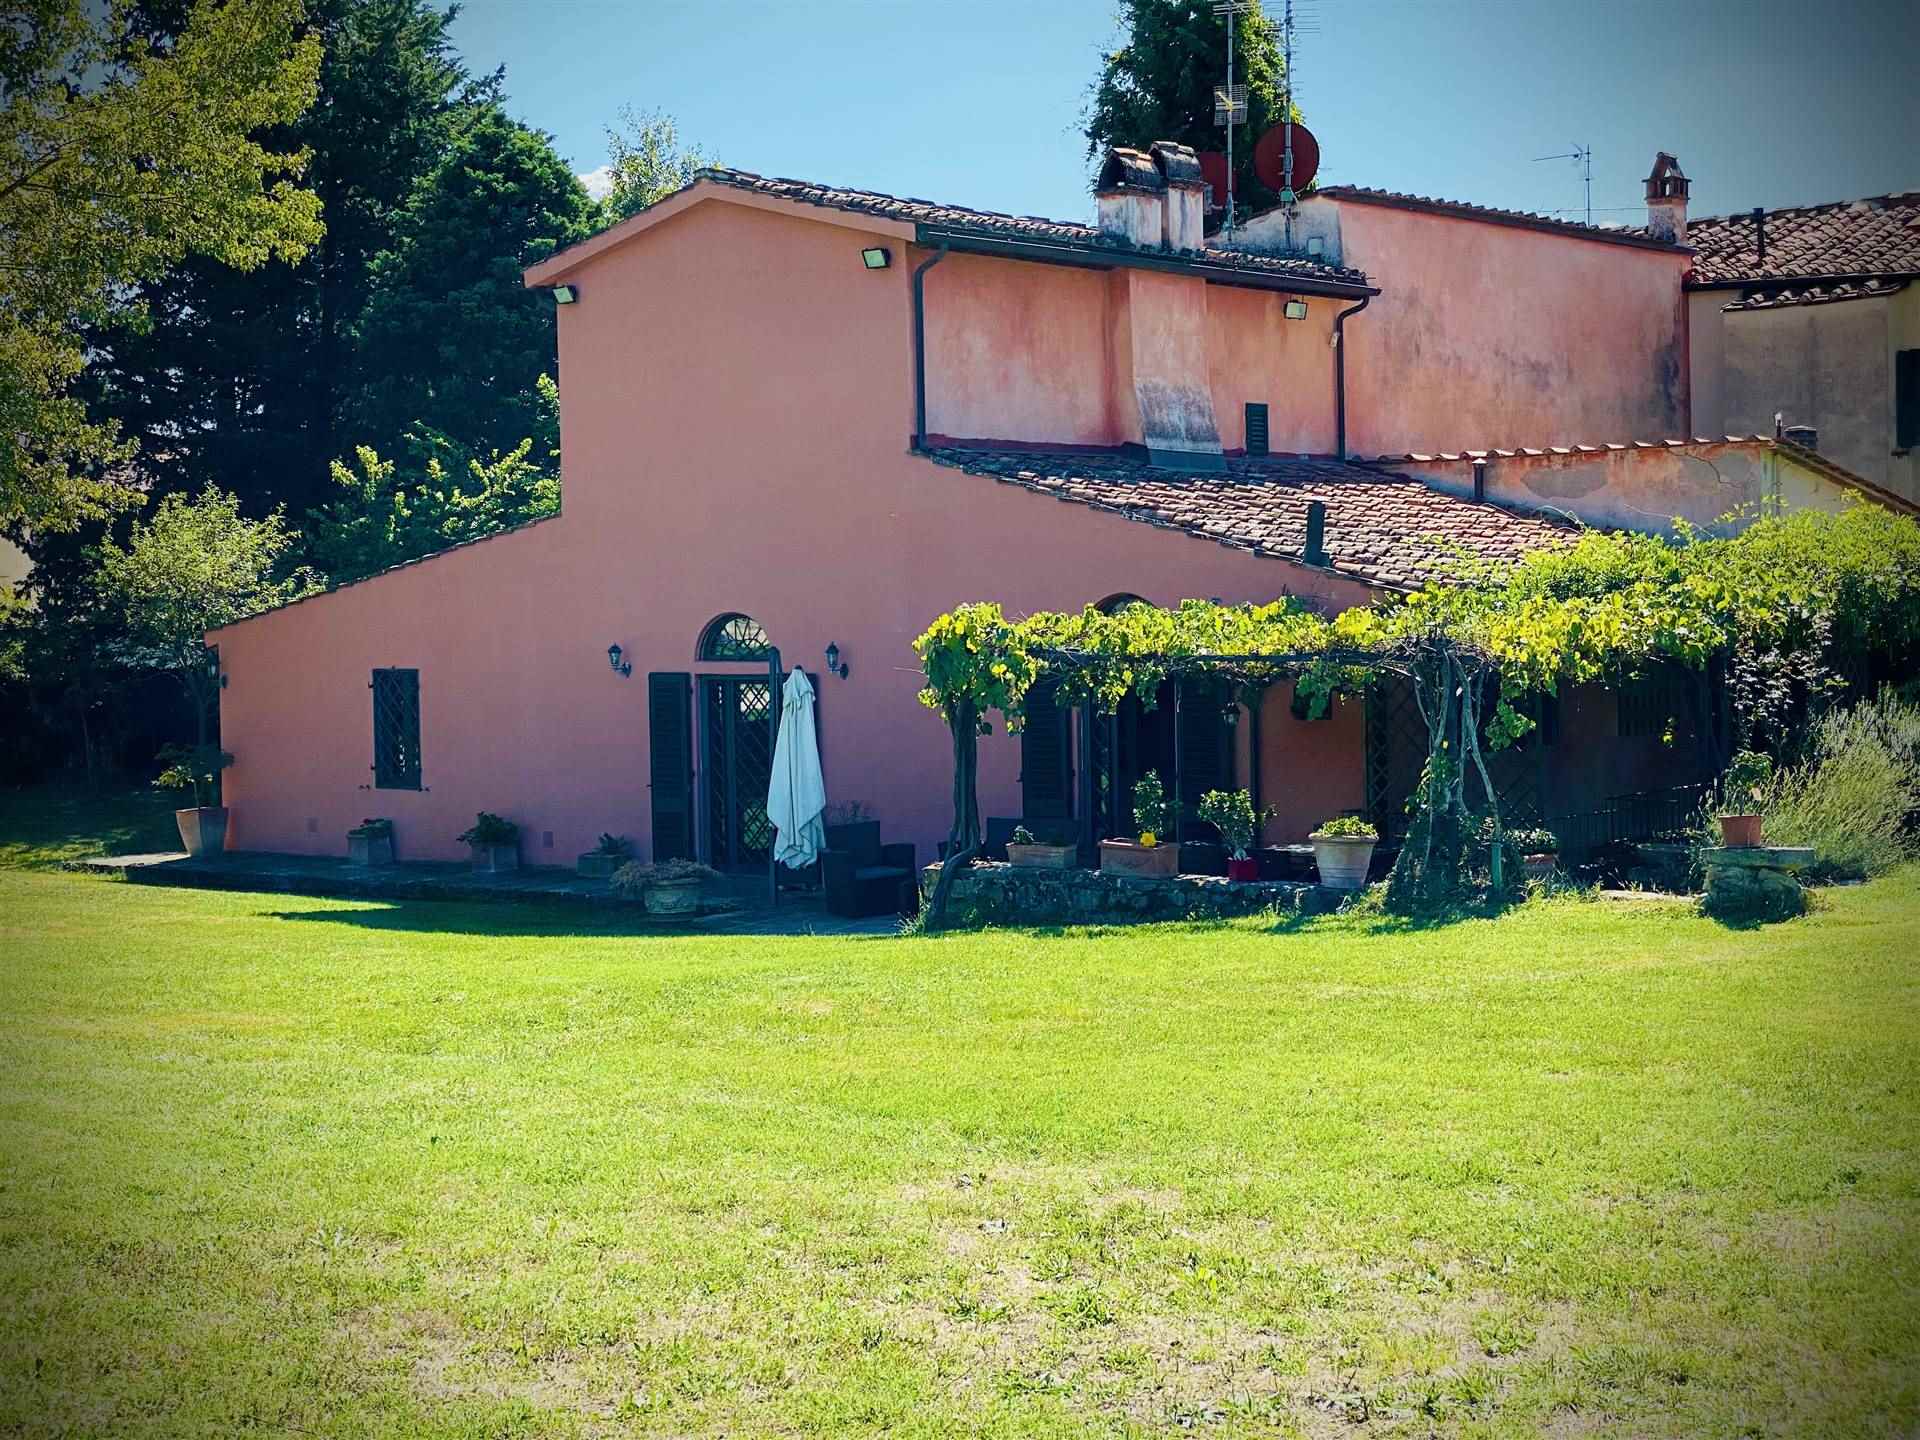 FLORENCE – CAREGGI We offer a splendid villa located in a residential area, free on three sides with a vast garden, enriched by a delightful stone 